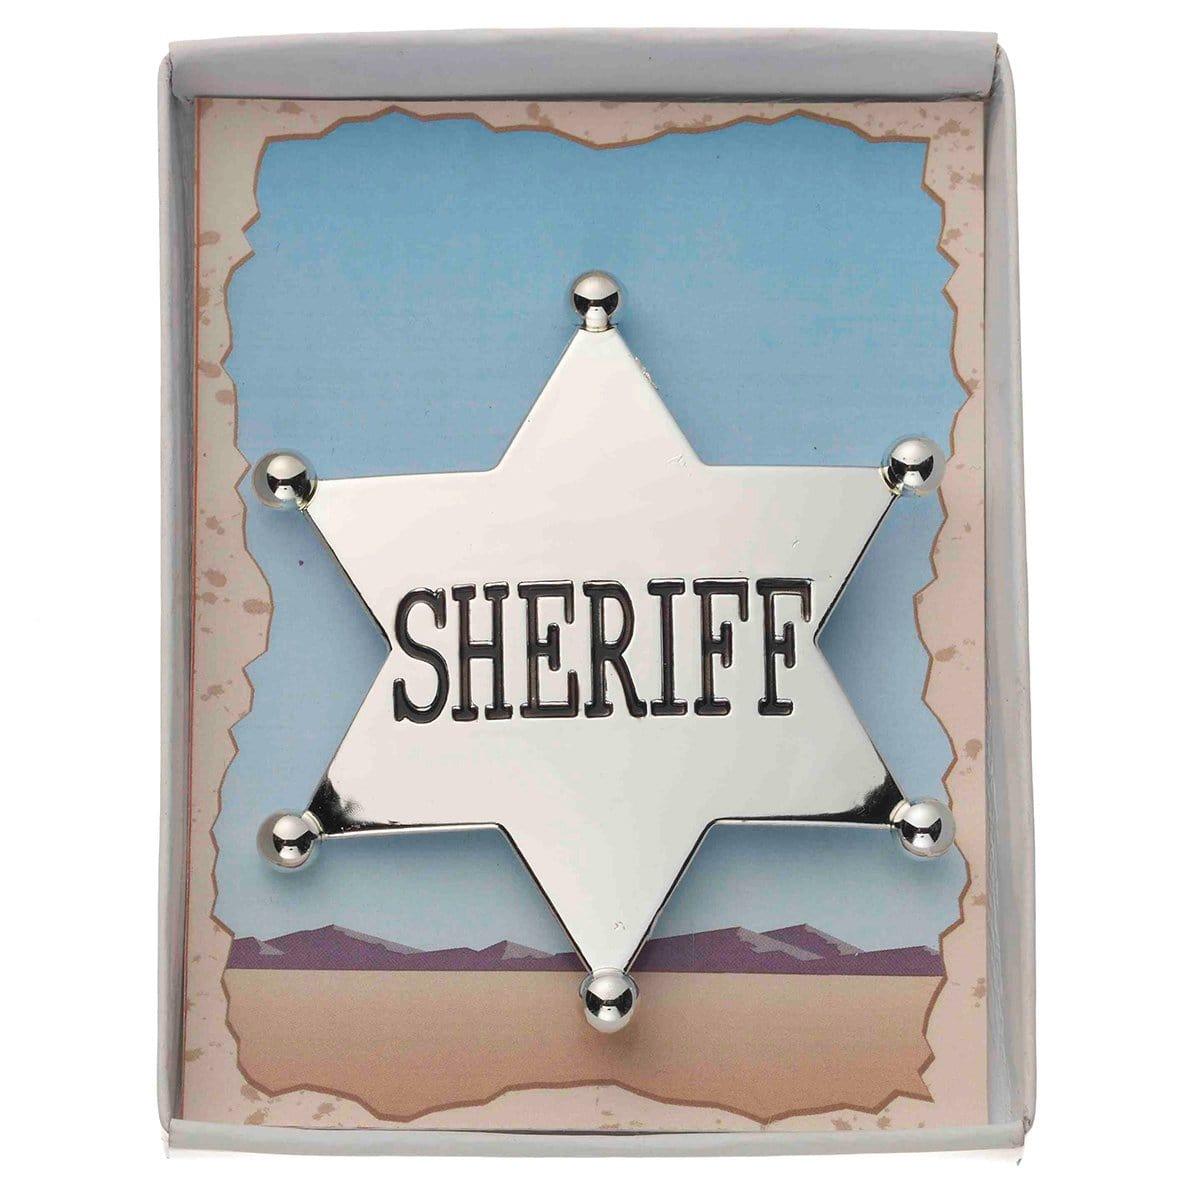 Buy Costume Accessories Silver sheriff badge sold at Party Expert